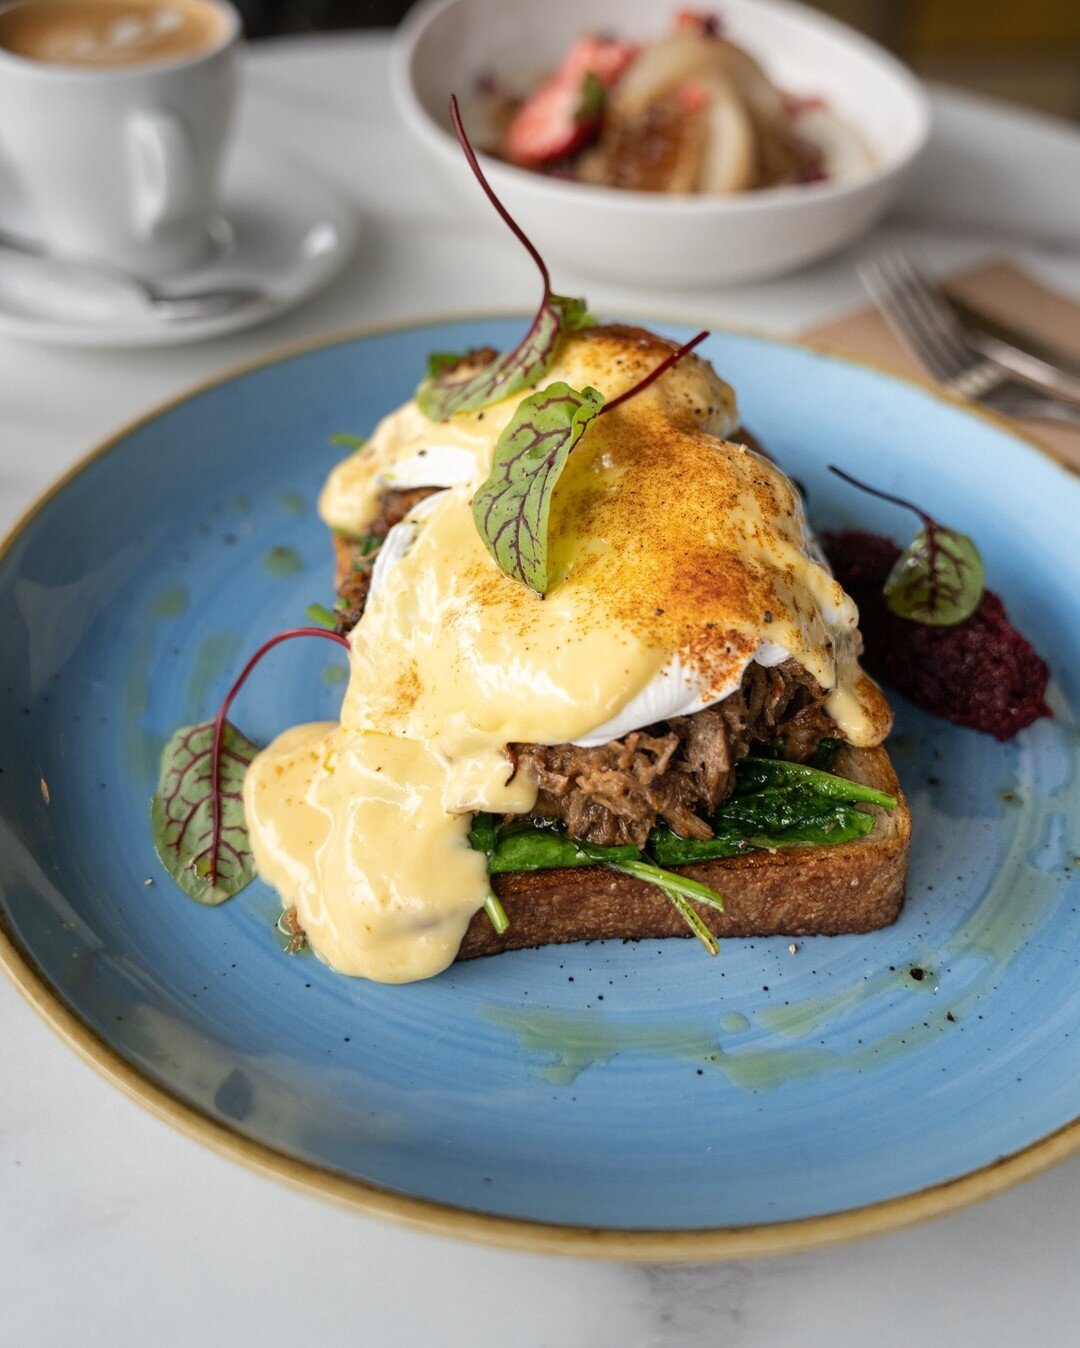 Have you tried our Duck Confit Eggs Benny? If not, now is the time! Join us today for brunch and live jazz. The musicians will be playing from 10am to 12pm. See you soon! ⠀⠀⠀⠀⠀⠀⠀⠀⠀
.⠀⠀⠀⠀⠀⠀⠀⠀⠀
.⠀⠀⠀⠀⠀⠀⠀⠀⠀
.#sydneycafe #sydneyeats #sydneyfoodies #sydney